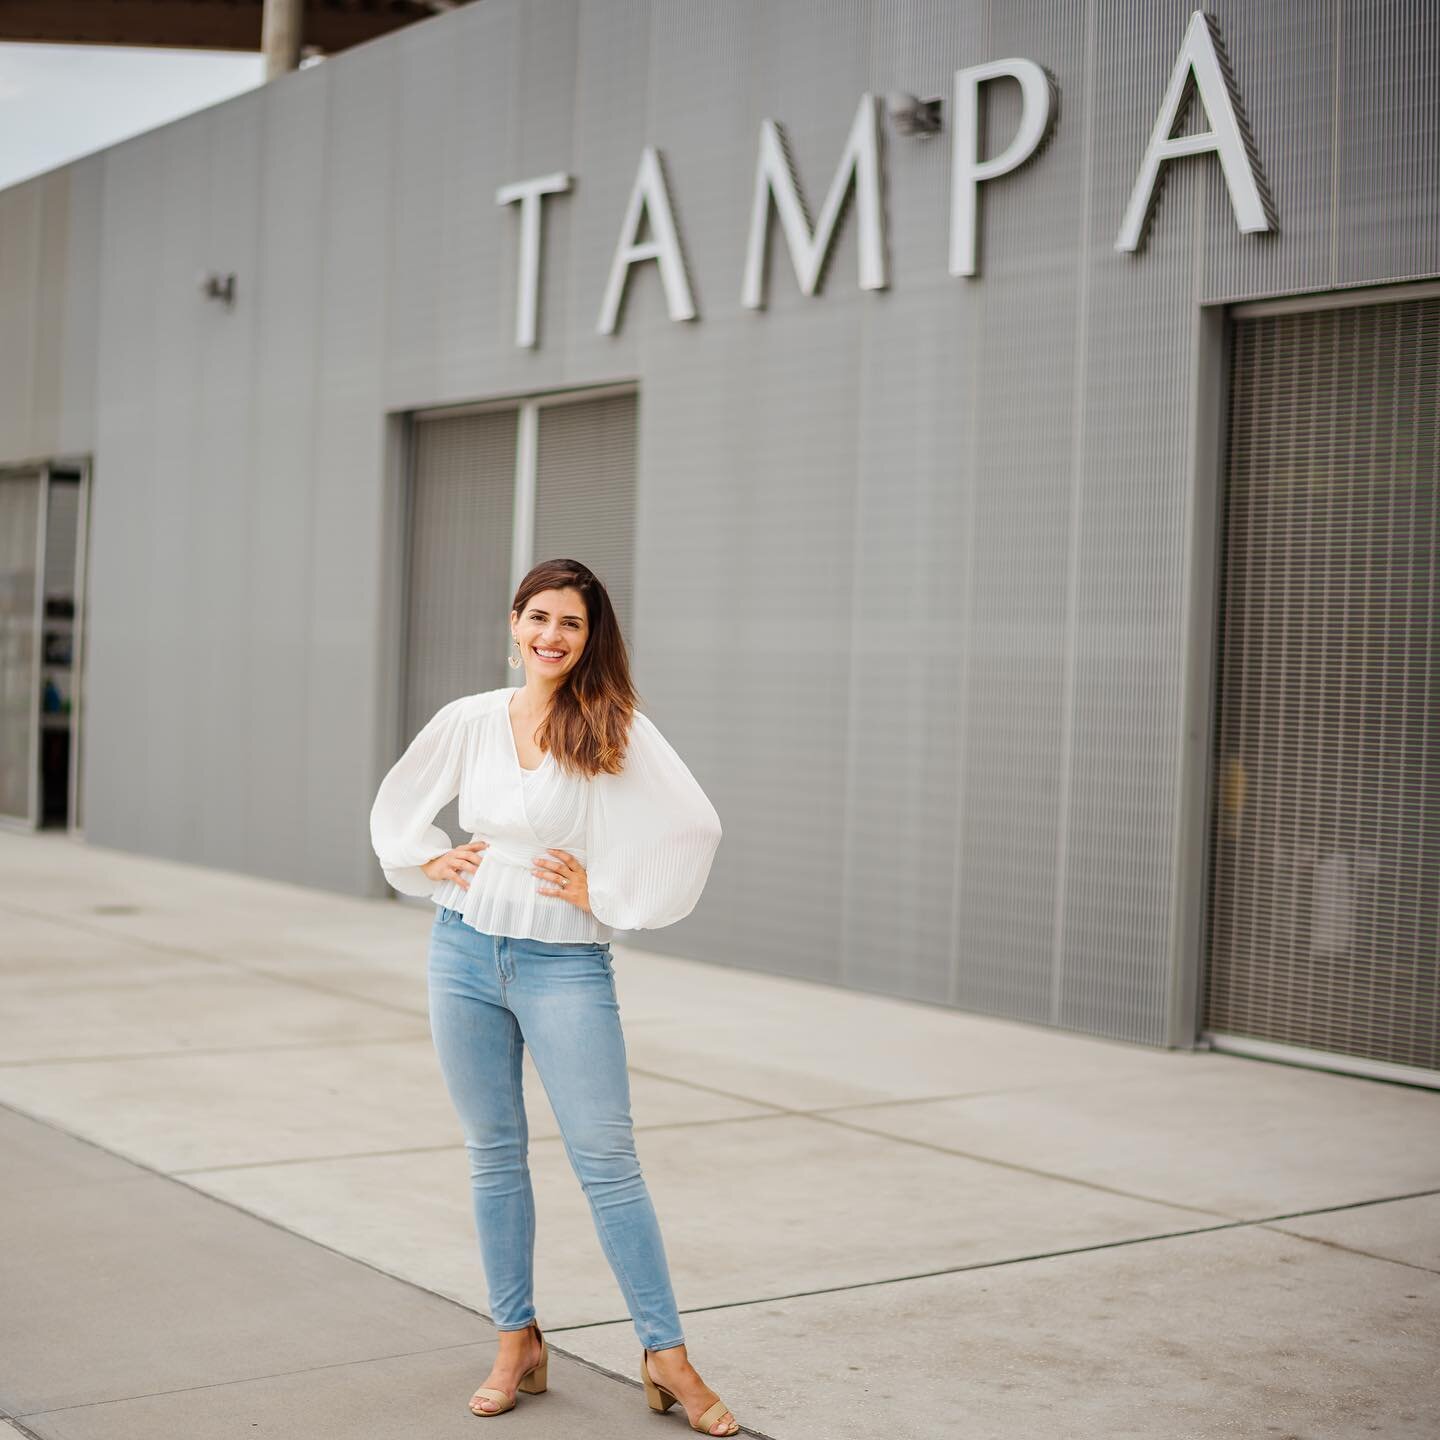 Hey there T A M P A B A Y!
Growing up in a small town made me yearn for bright lights and a big city. You're going to laugh, but when I went away for college at the University of Florida in Gainesville I thought I had moved to a metropolis. 😂
&bull;